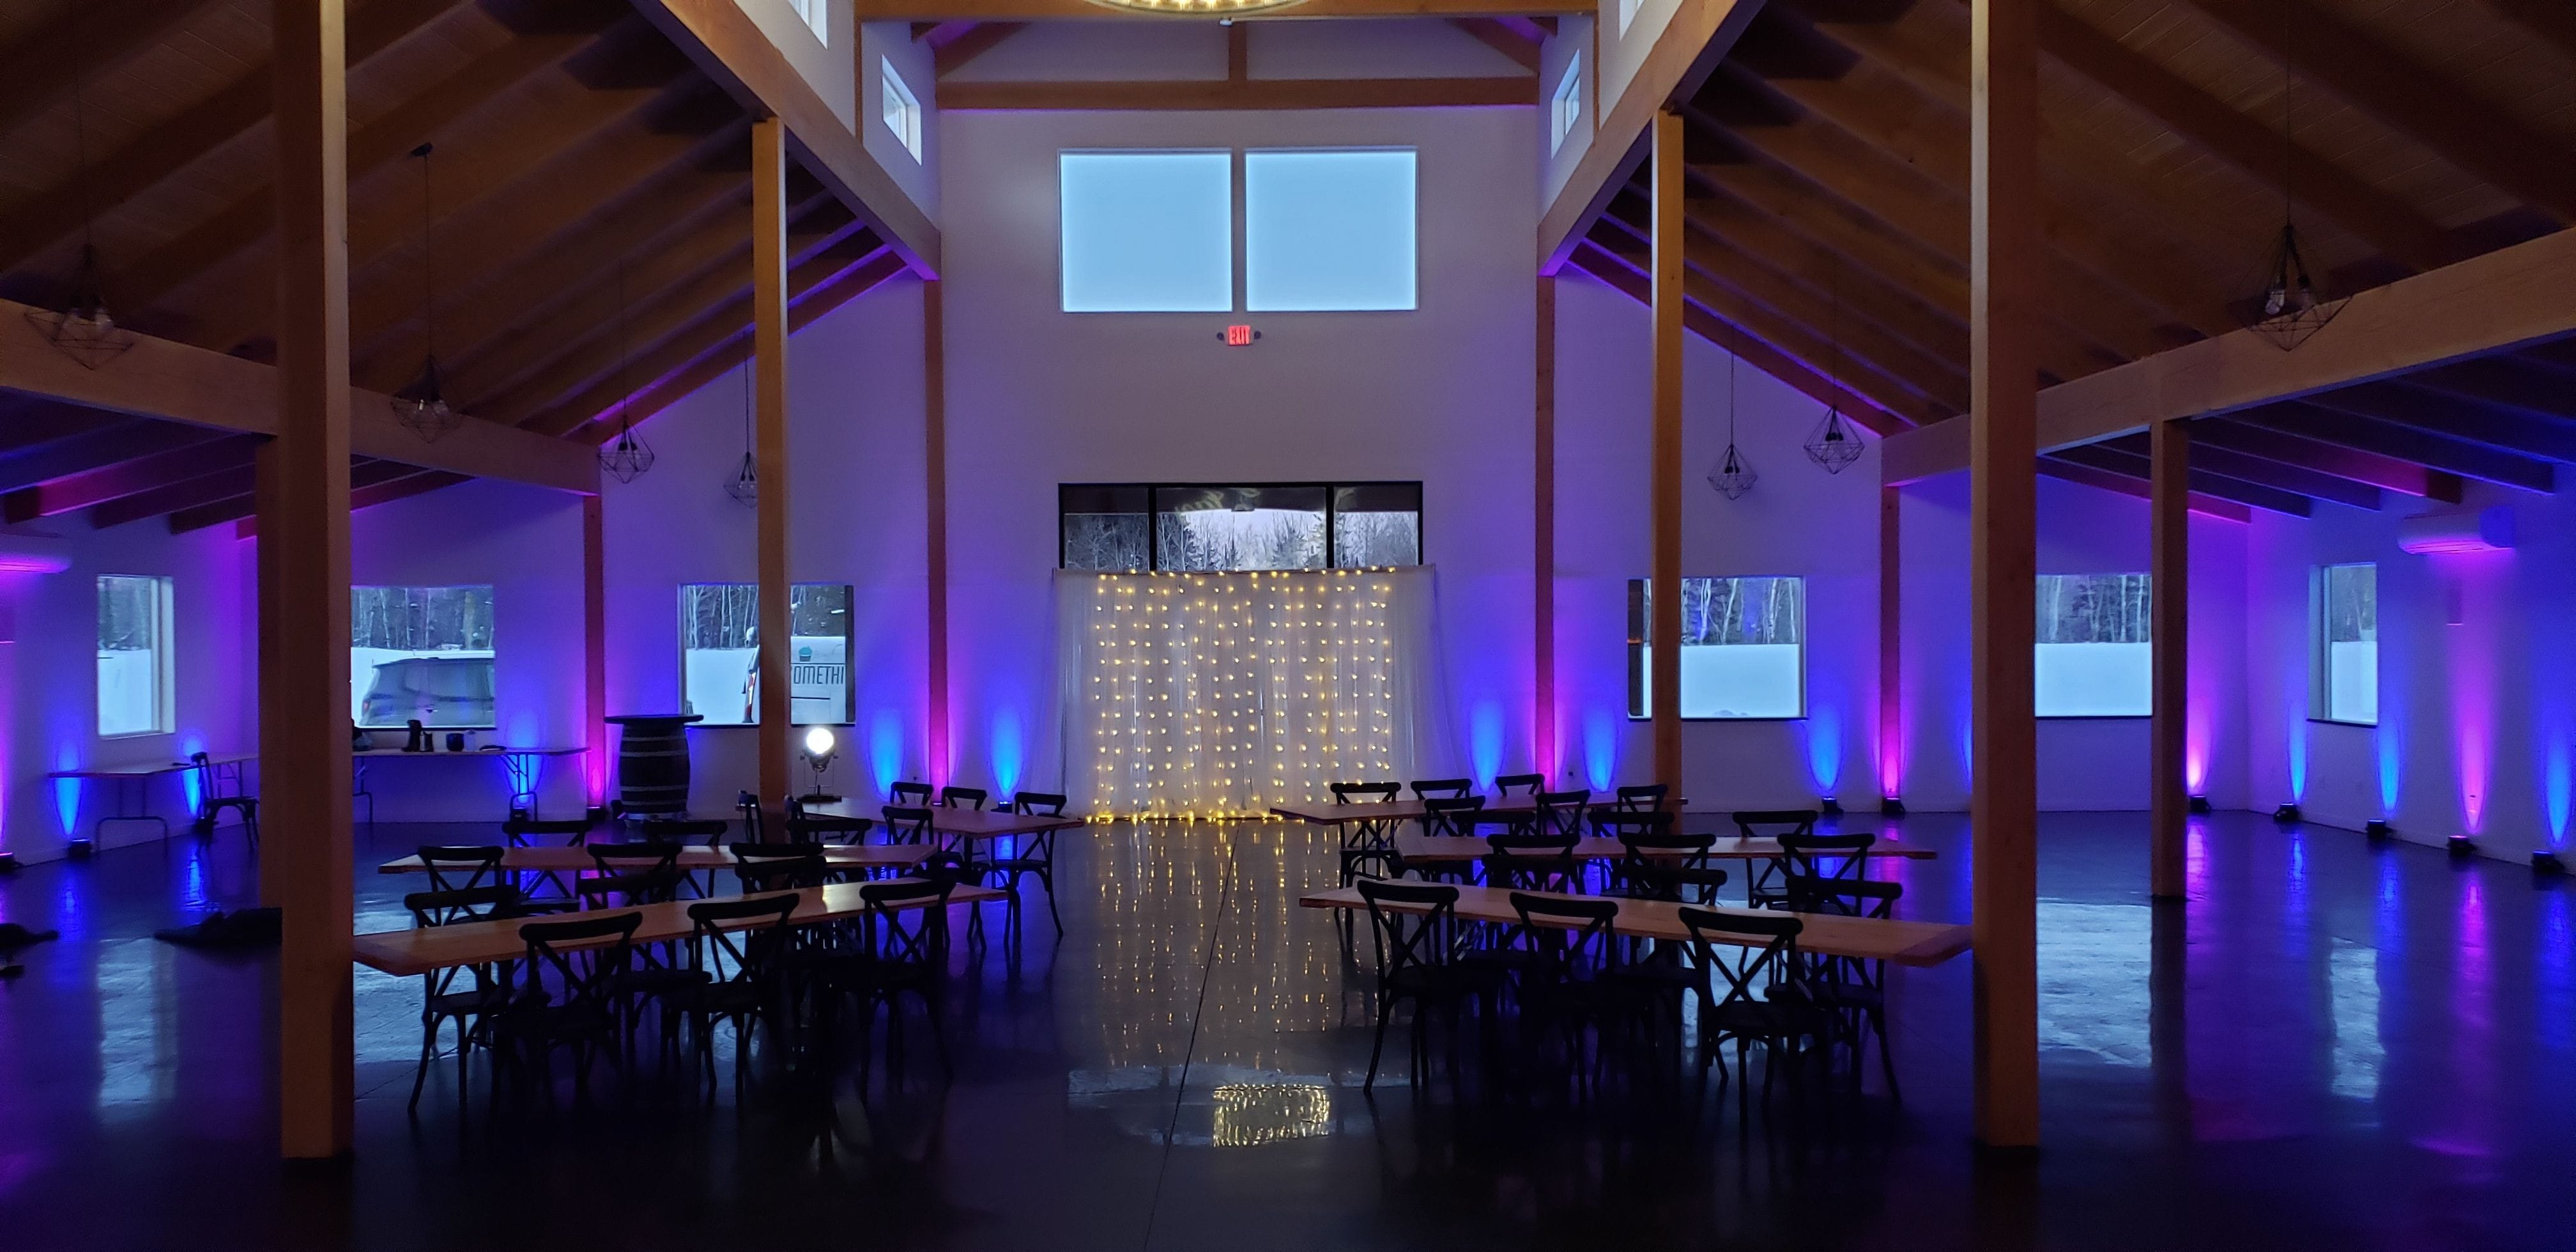 Wedding lighting at Ivy Black in blue and purple up lighting by Duluth Event Lighting.